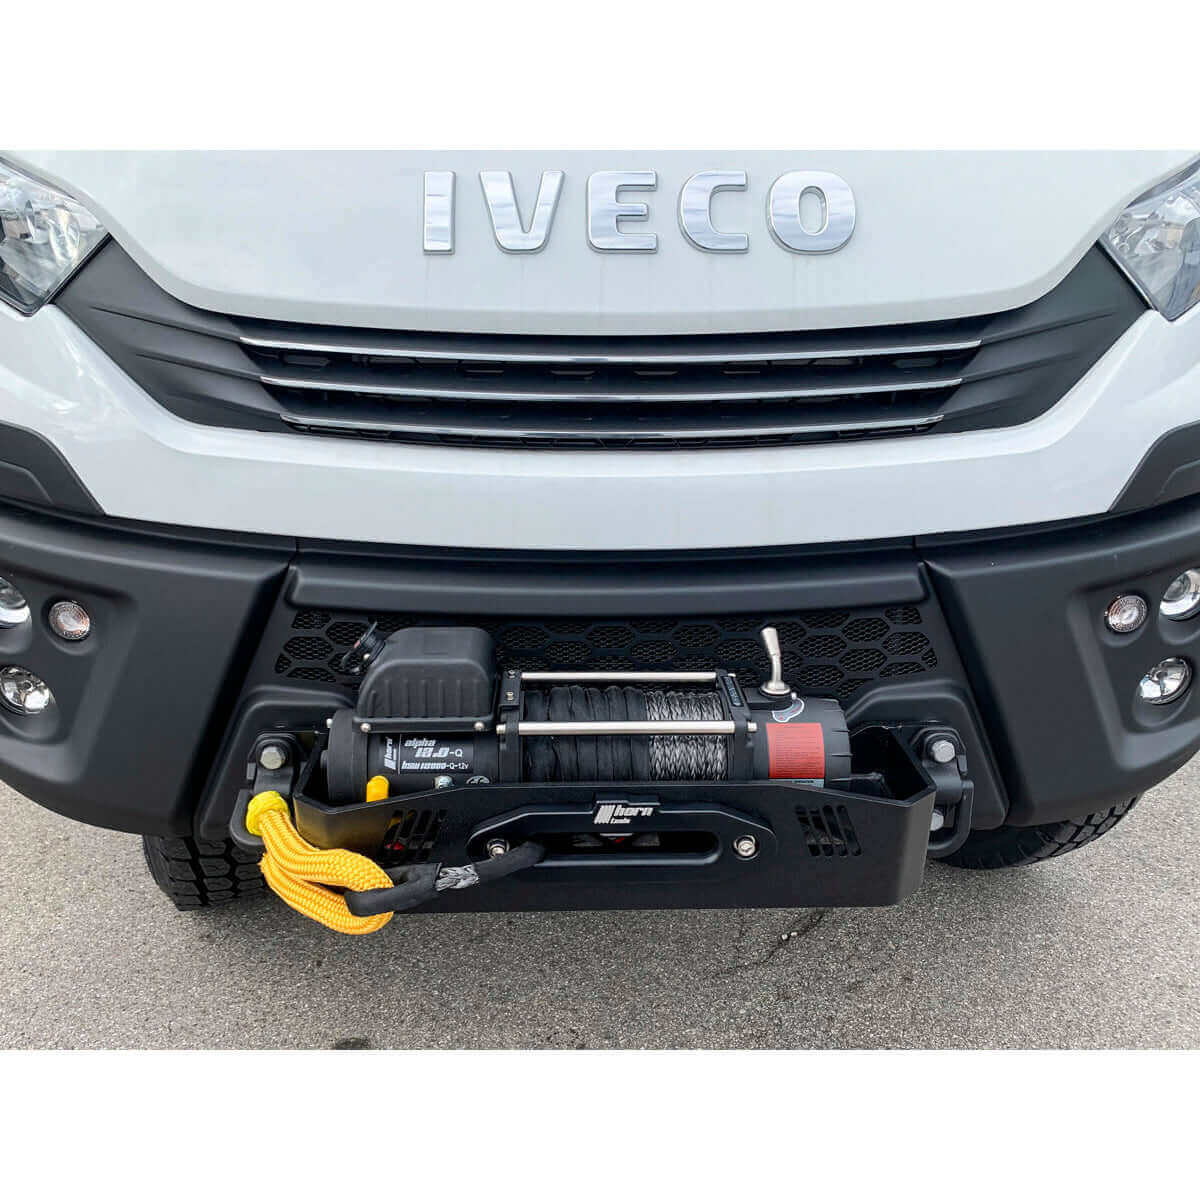 Kabelliersysteem Alpha voor Iveco Daily 4x4 - 5,4 ton